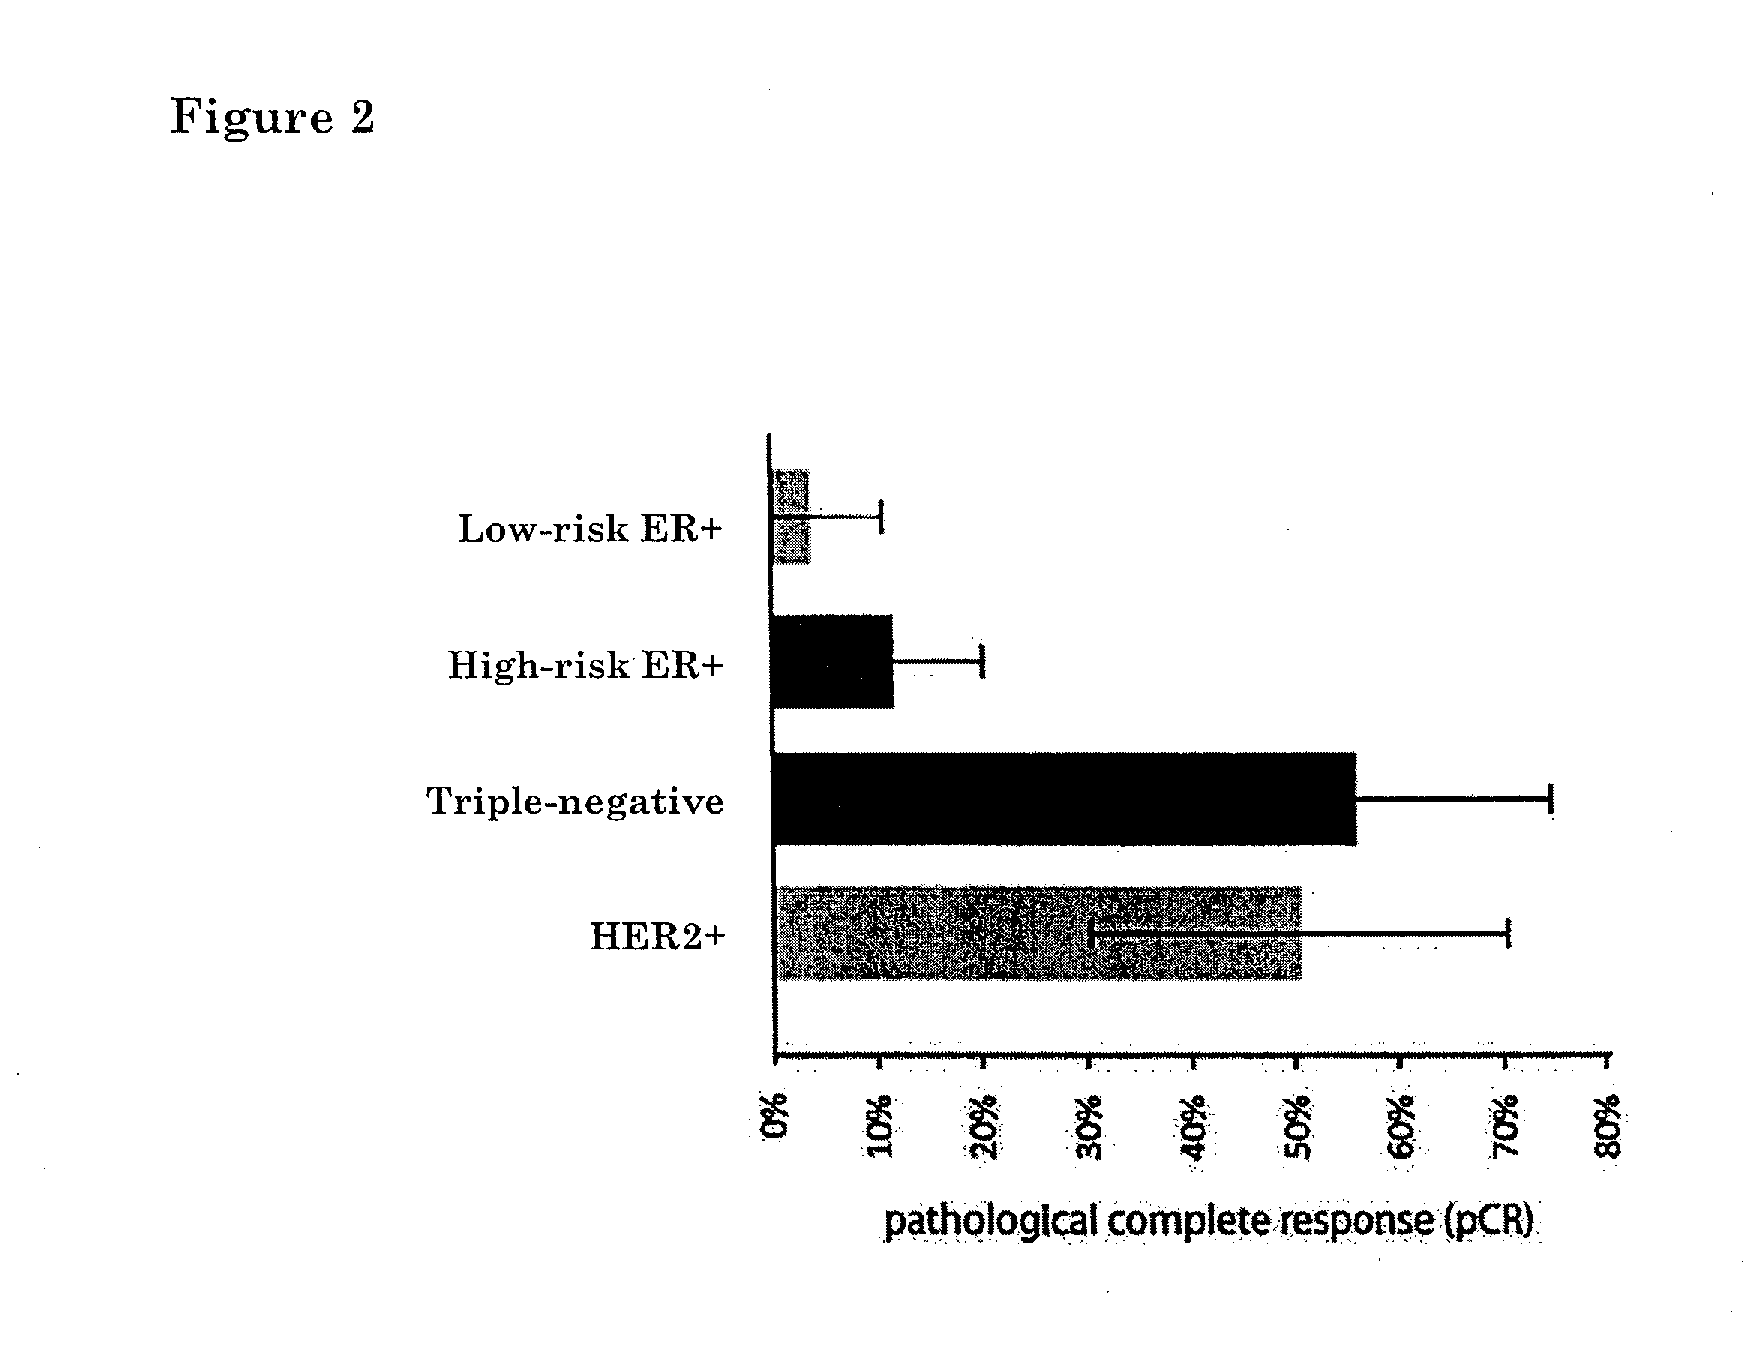 Means and methods for molecular classification of breast cancer